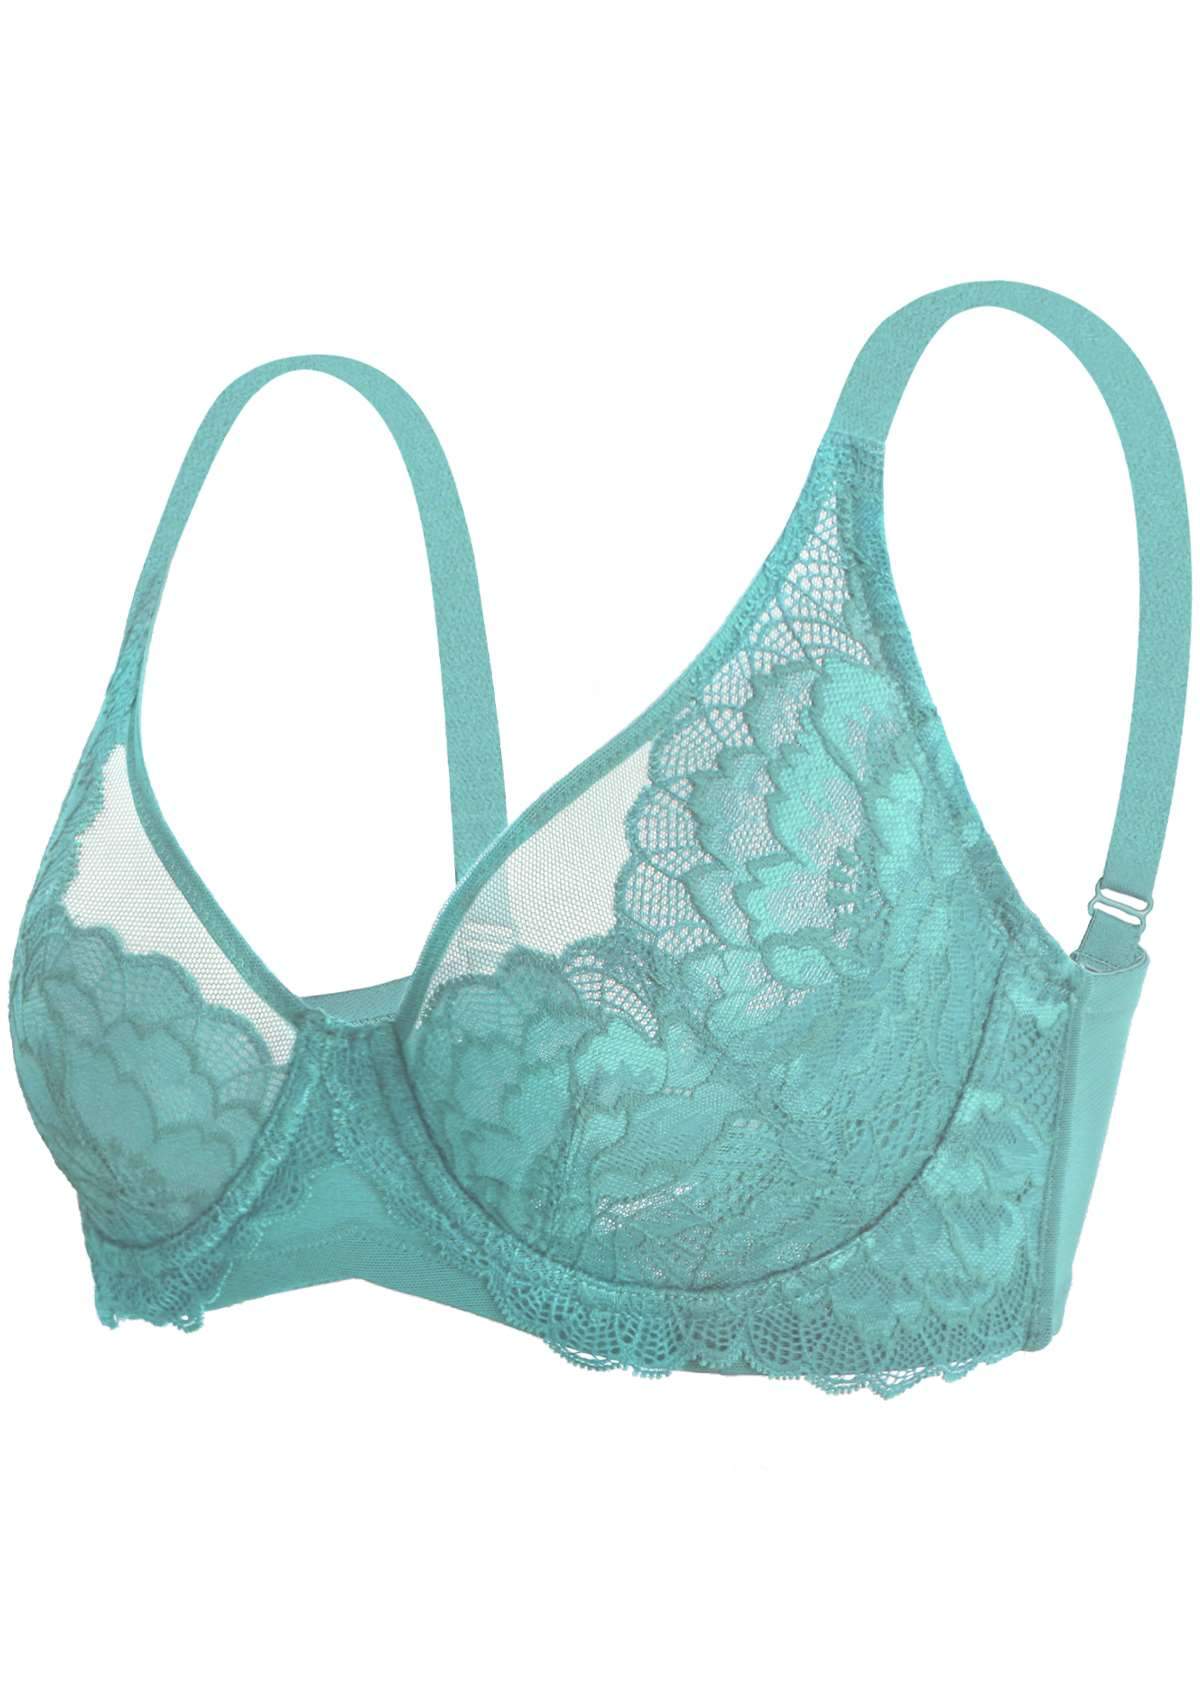 HSIA Peony Lace Unlined Supportive Underwire Bra - Green / 42 / C